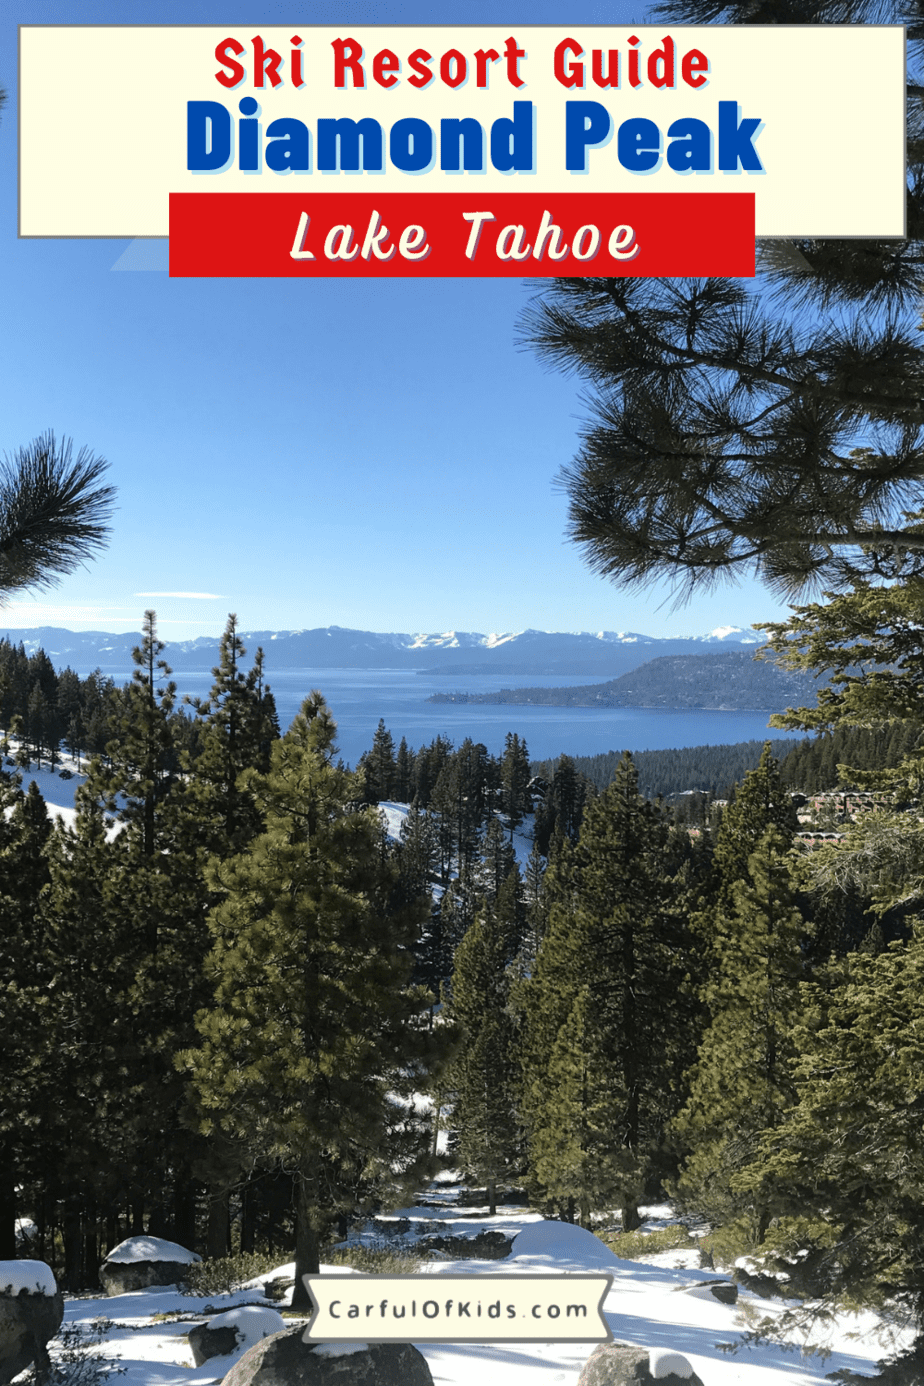 Ski like a local at Diamond Peak Ski Resort in Incline Village, Nevada, at Lake Tahoe. It's open for the 2020-2021 season with availability during peak periods. Find kids lessons for 3 and older. Located on the North Shore so find amazing views of Lake Tahoe too. Get all the details on how to ski in the 2020-2021 season with lift ticket prices and more. Where to go skiing in Lake Tahoe | Resorts in Lake Tahoe #LakeTahoe #Nevada